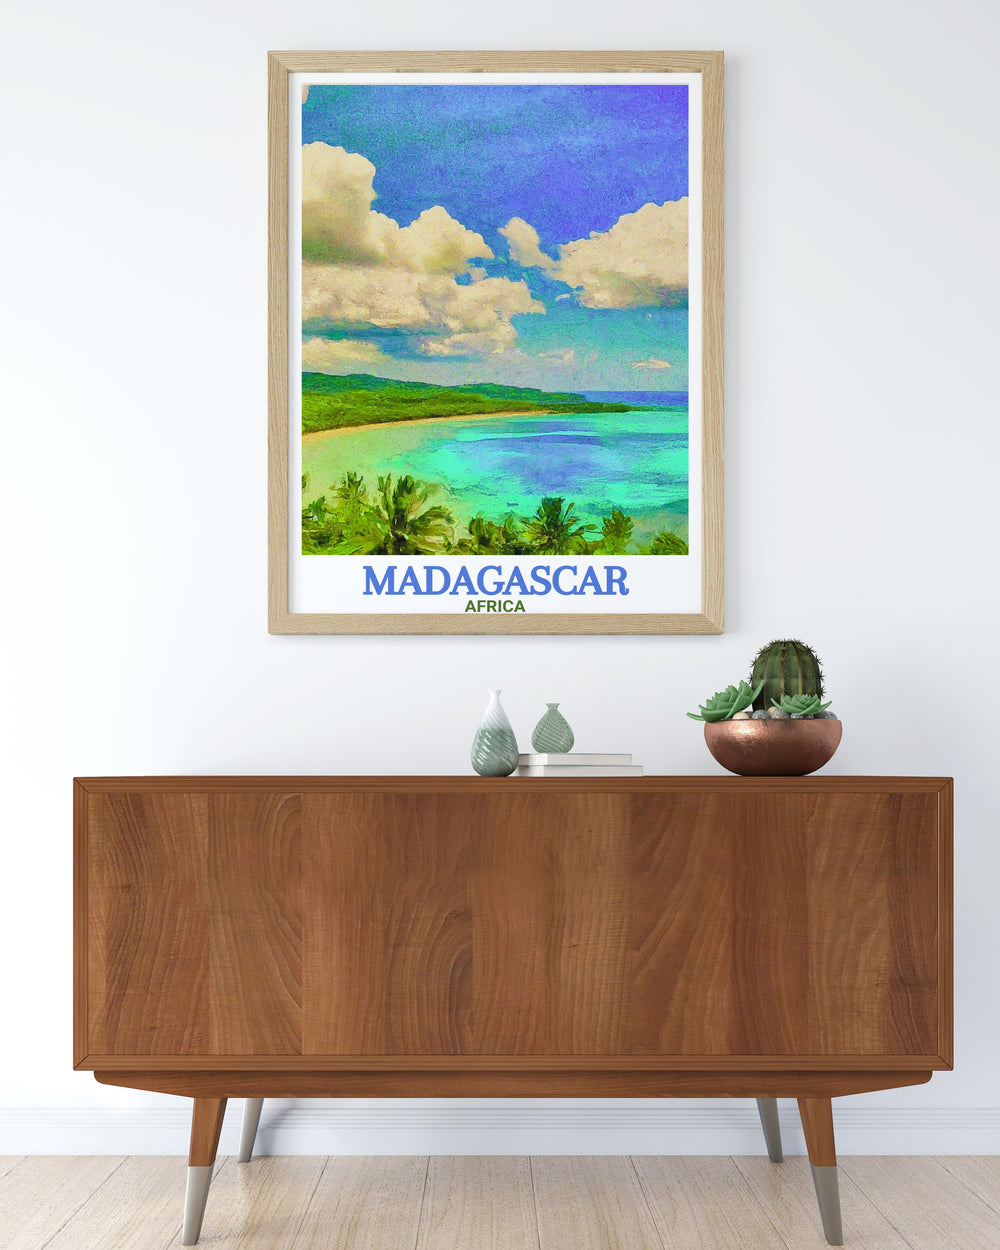 Nosy Be poster showcasing the serene beaches and vibrant marine life of Madagascar perfect for Africa wall decor and gifts for him or her an ideal addition to any living space or office for those who appreciate the beauty of nature